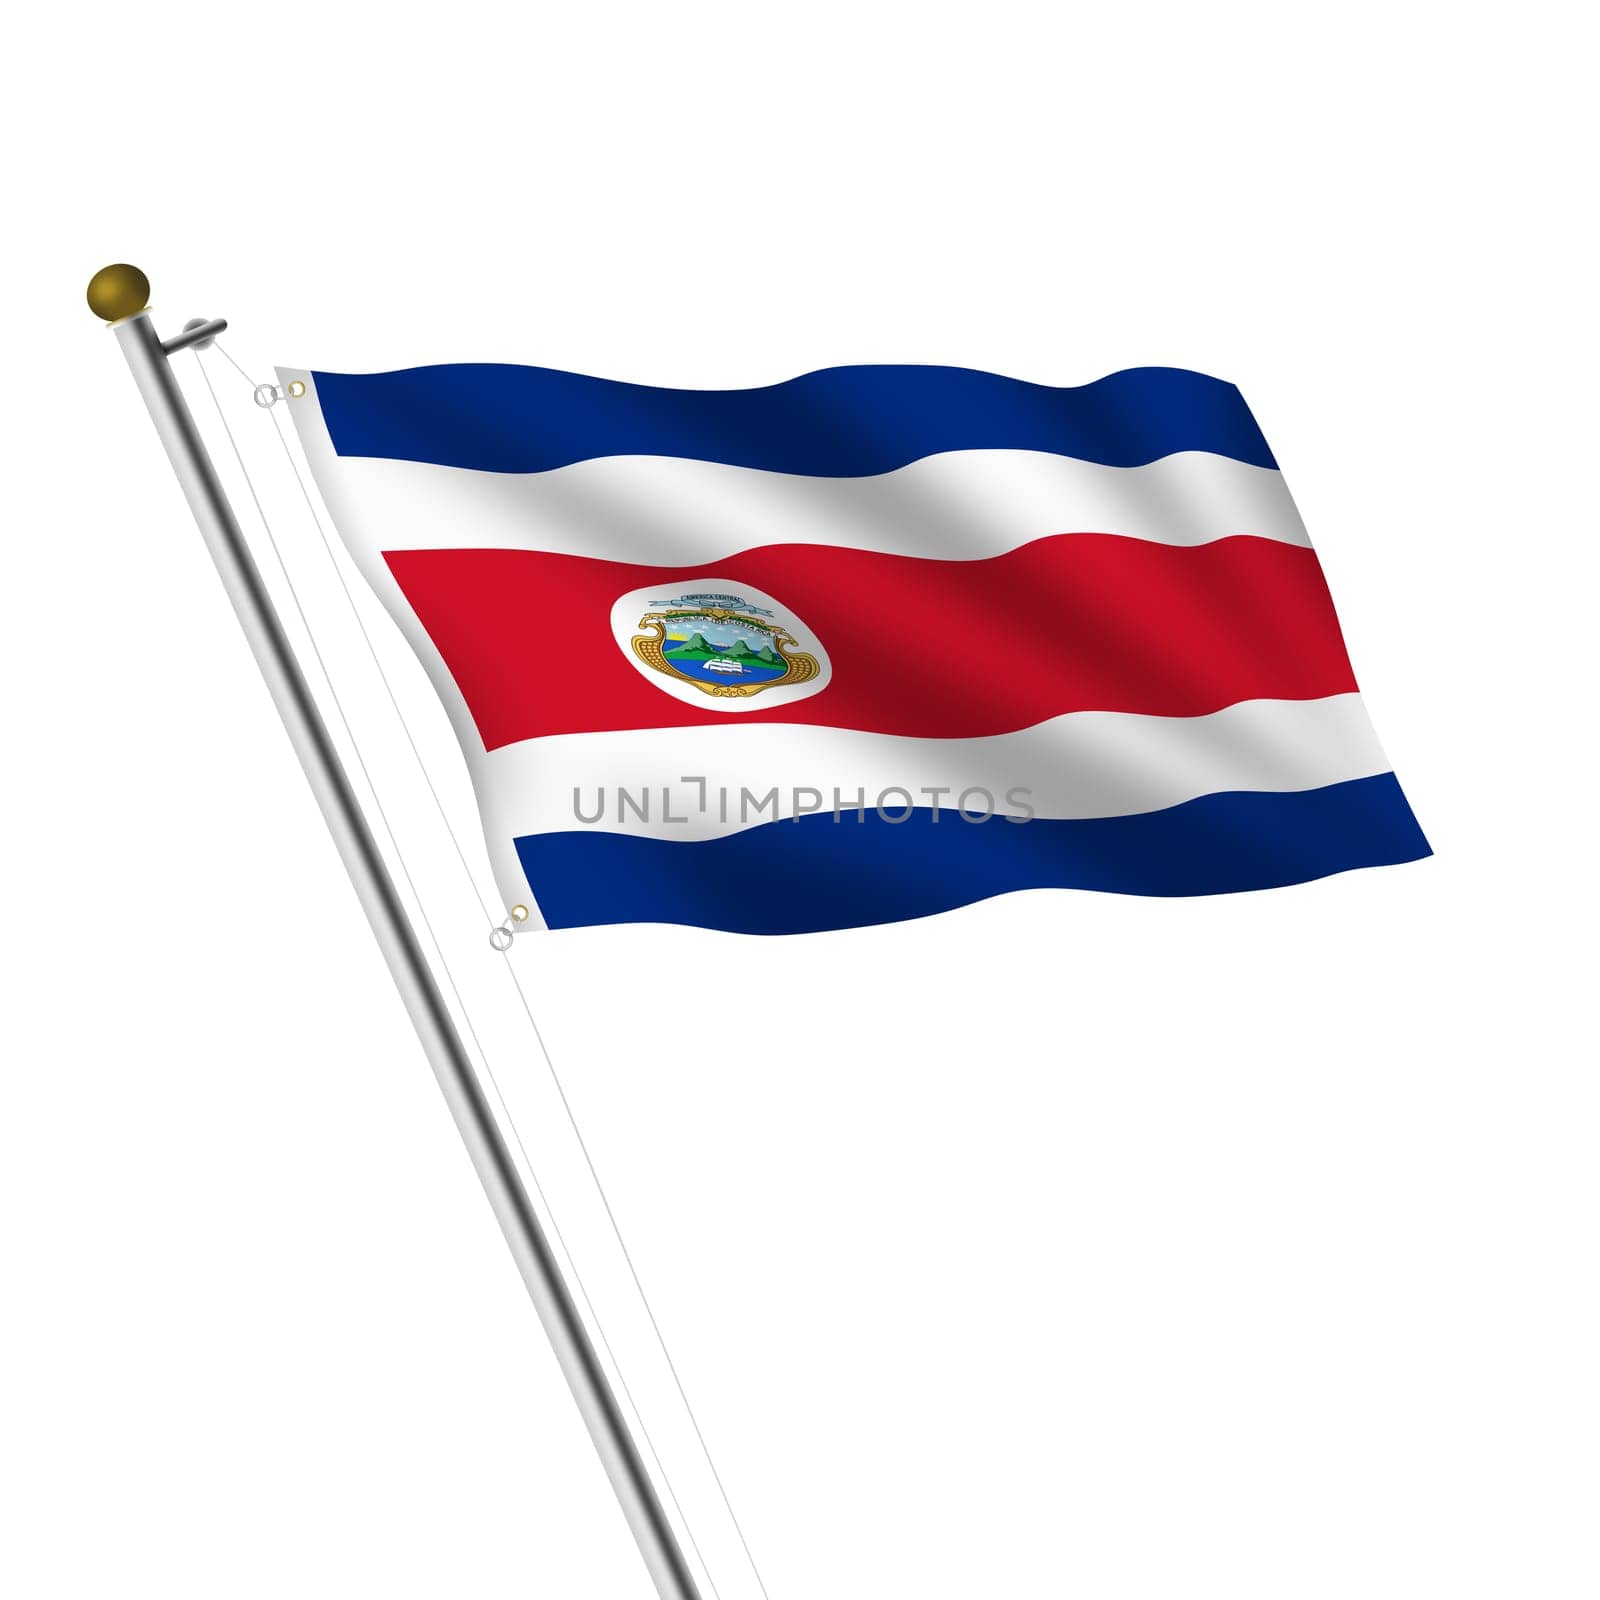 Costa Rica Flagpole with clipping path by VivacityImages